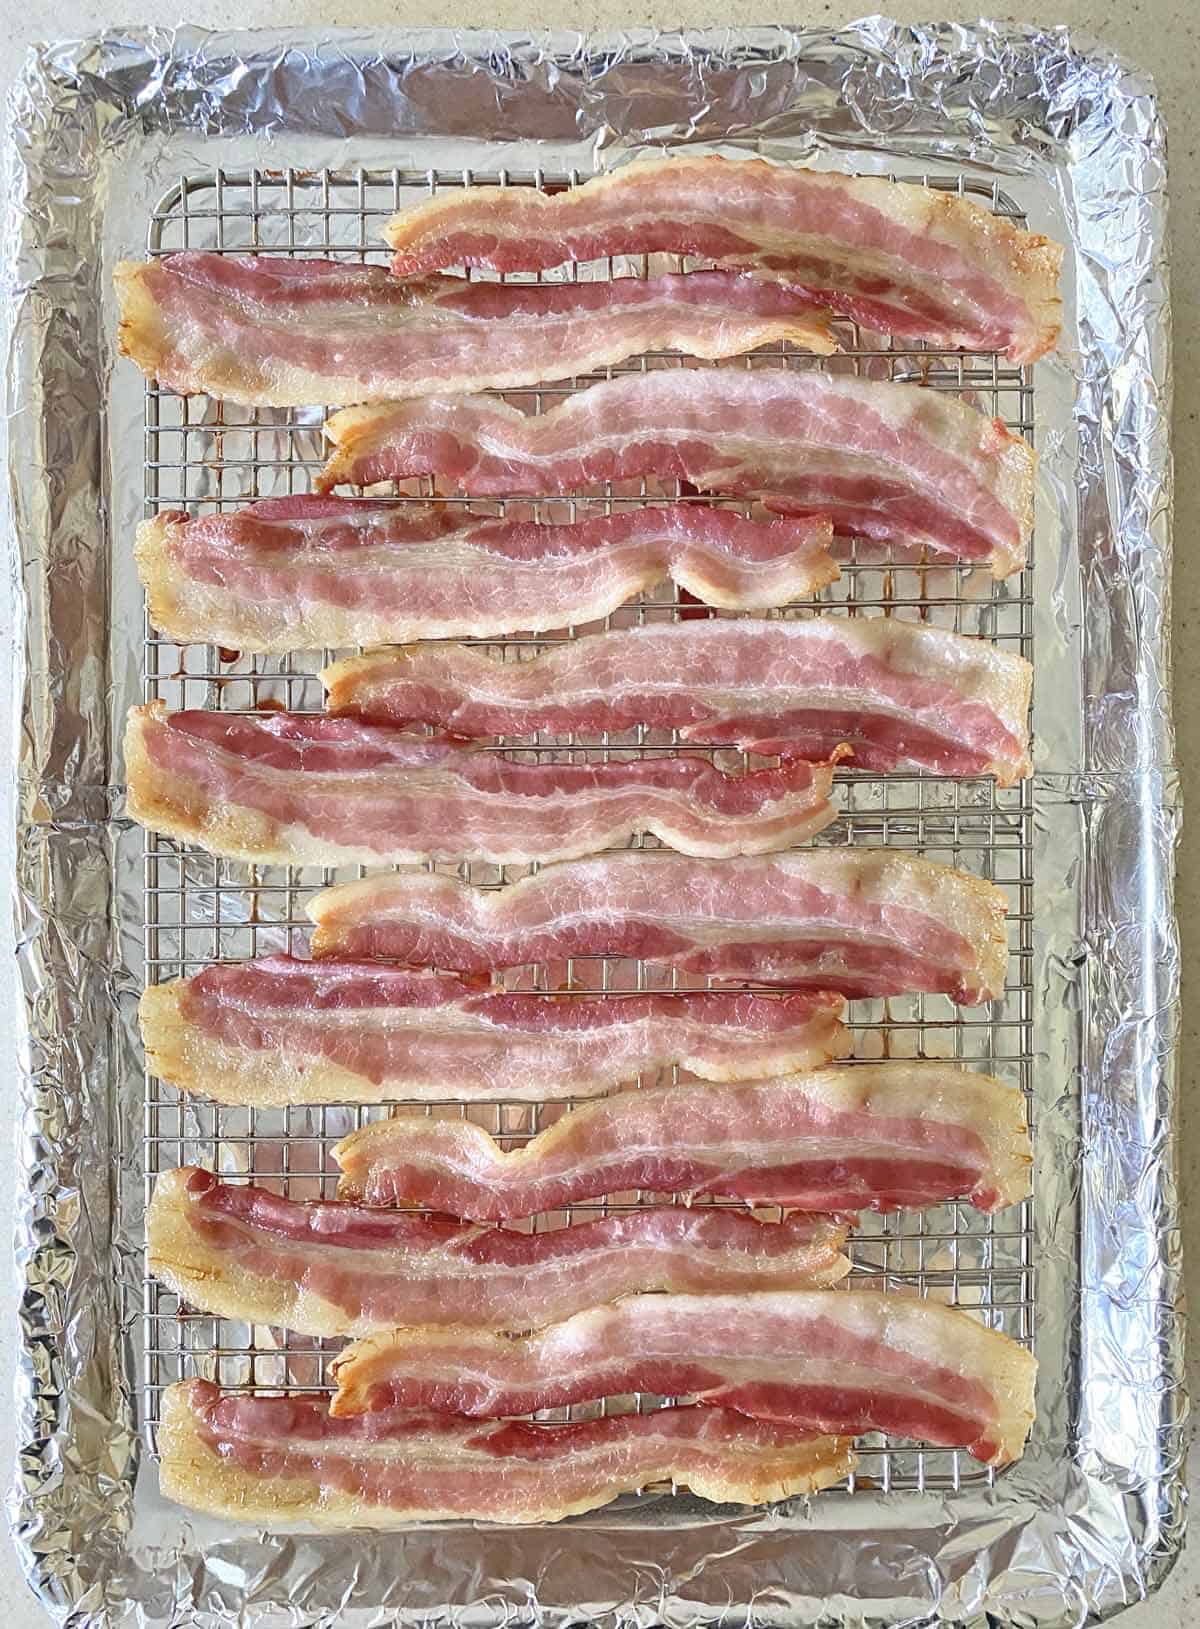 12 slices of partially cooked bacon jerky on a baking rack set on a foil lined baking sheet.